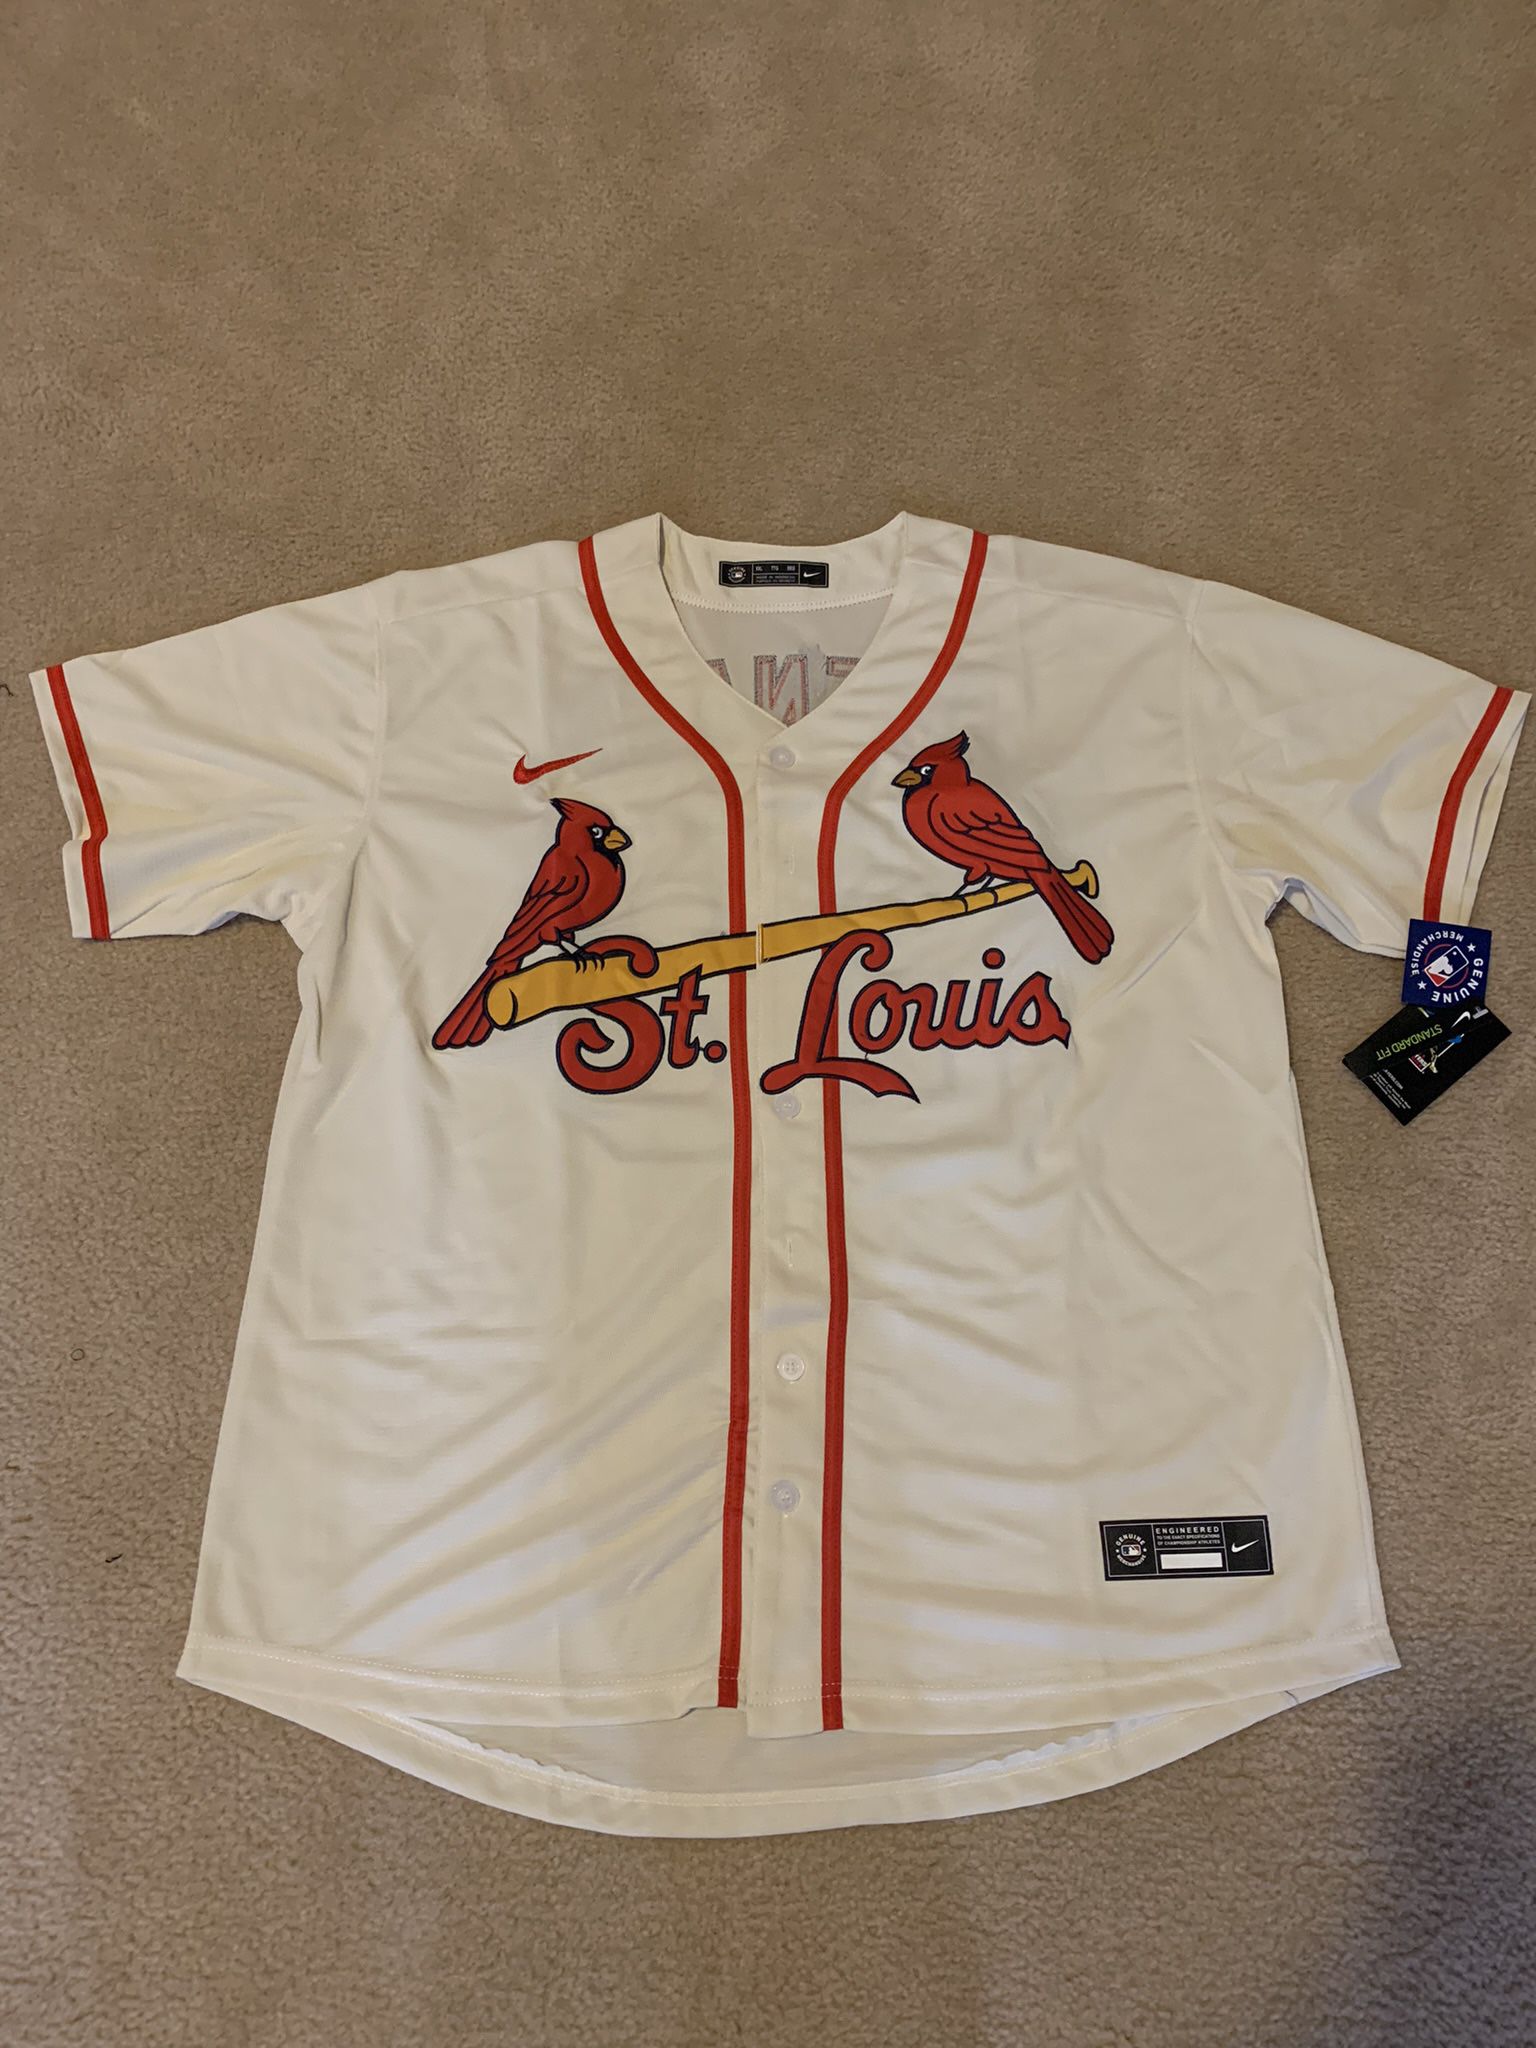 Nolan Arenado Jersey for Sale in St. Louis, MO - OfferUp